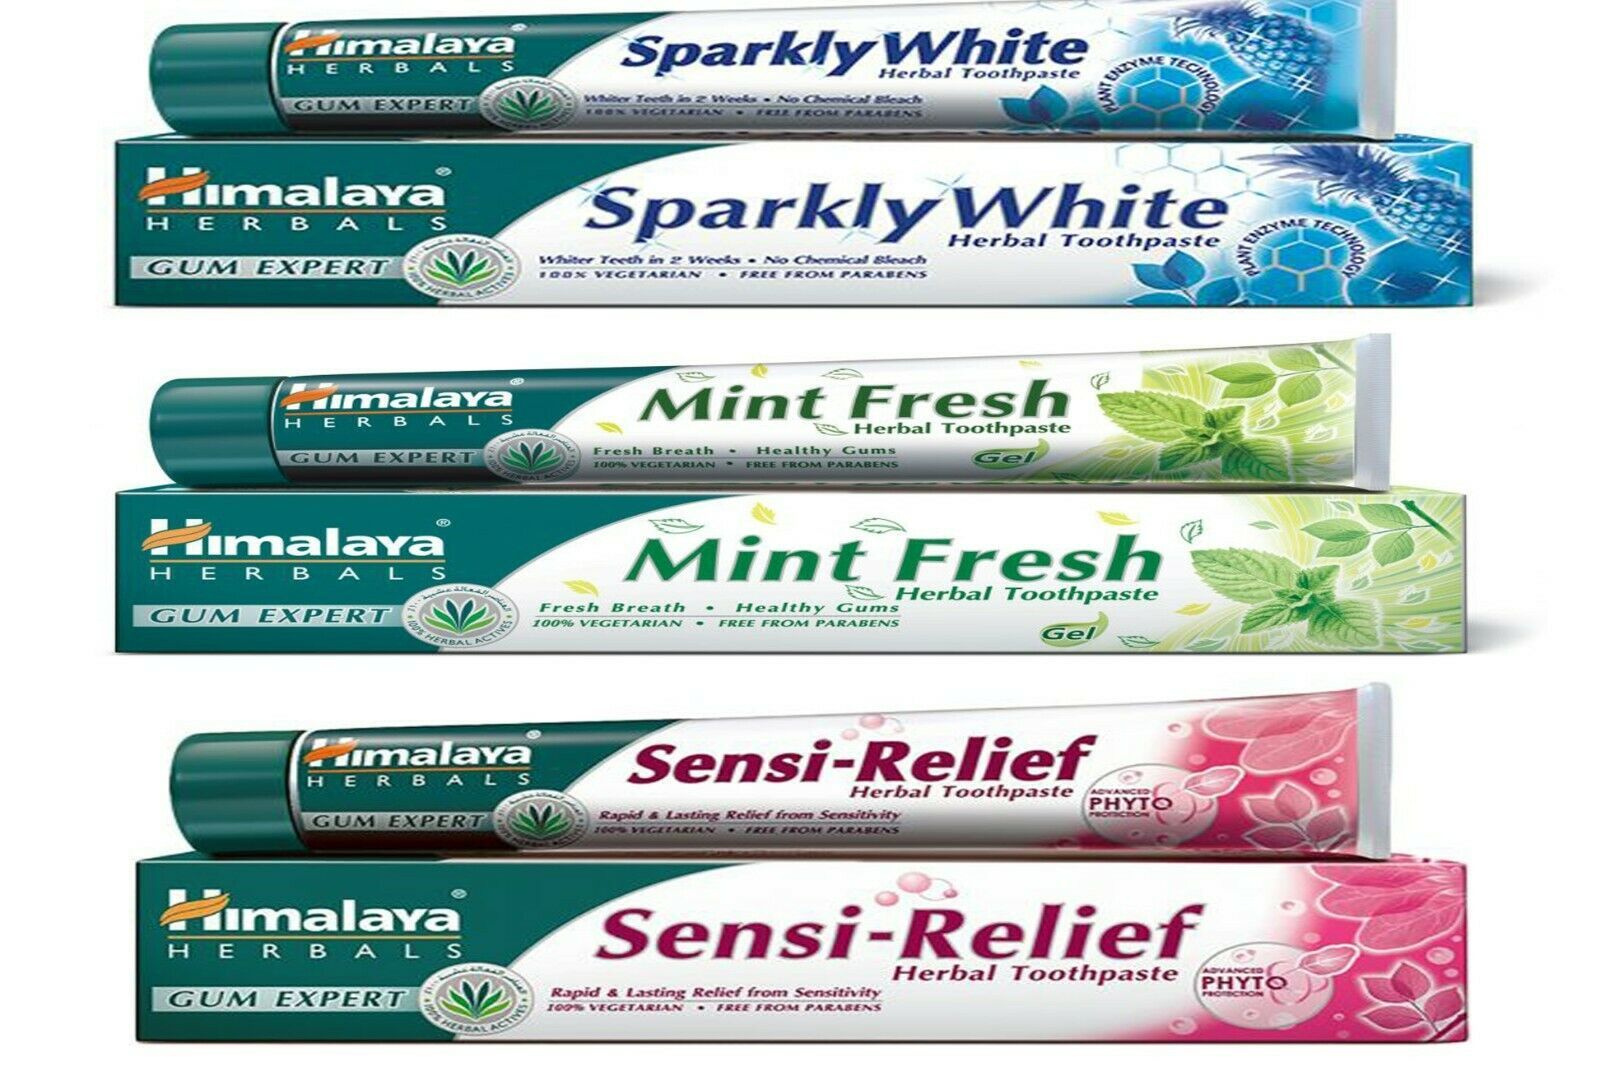 100ml. Himalaya Natural Herbal Toothpaste Sensi-Relief Mint Fresh Sparkly White